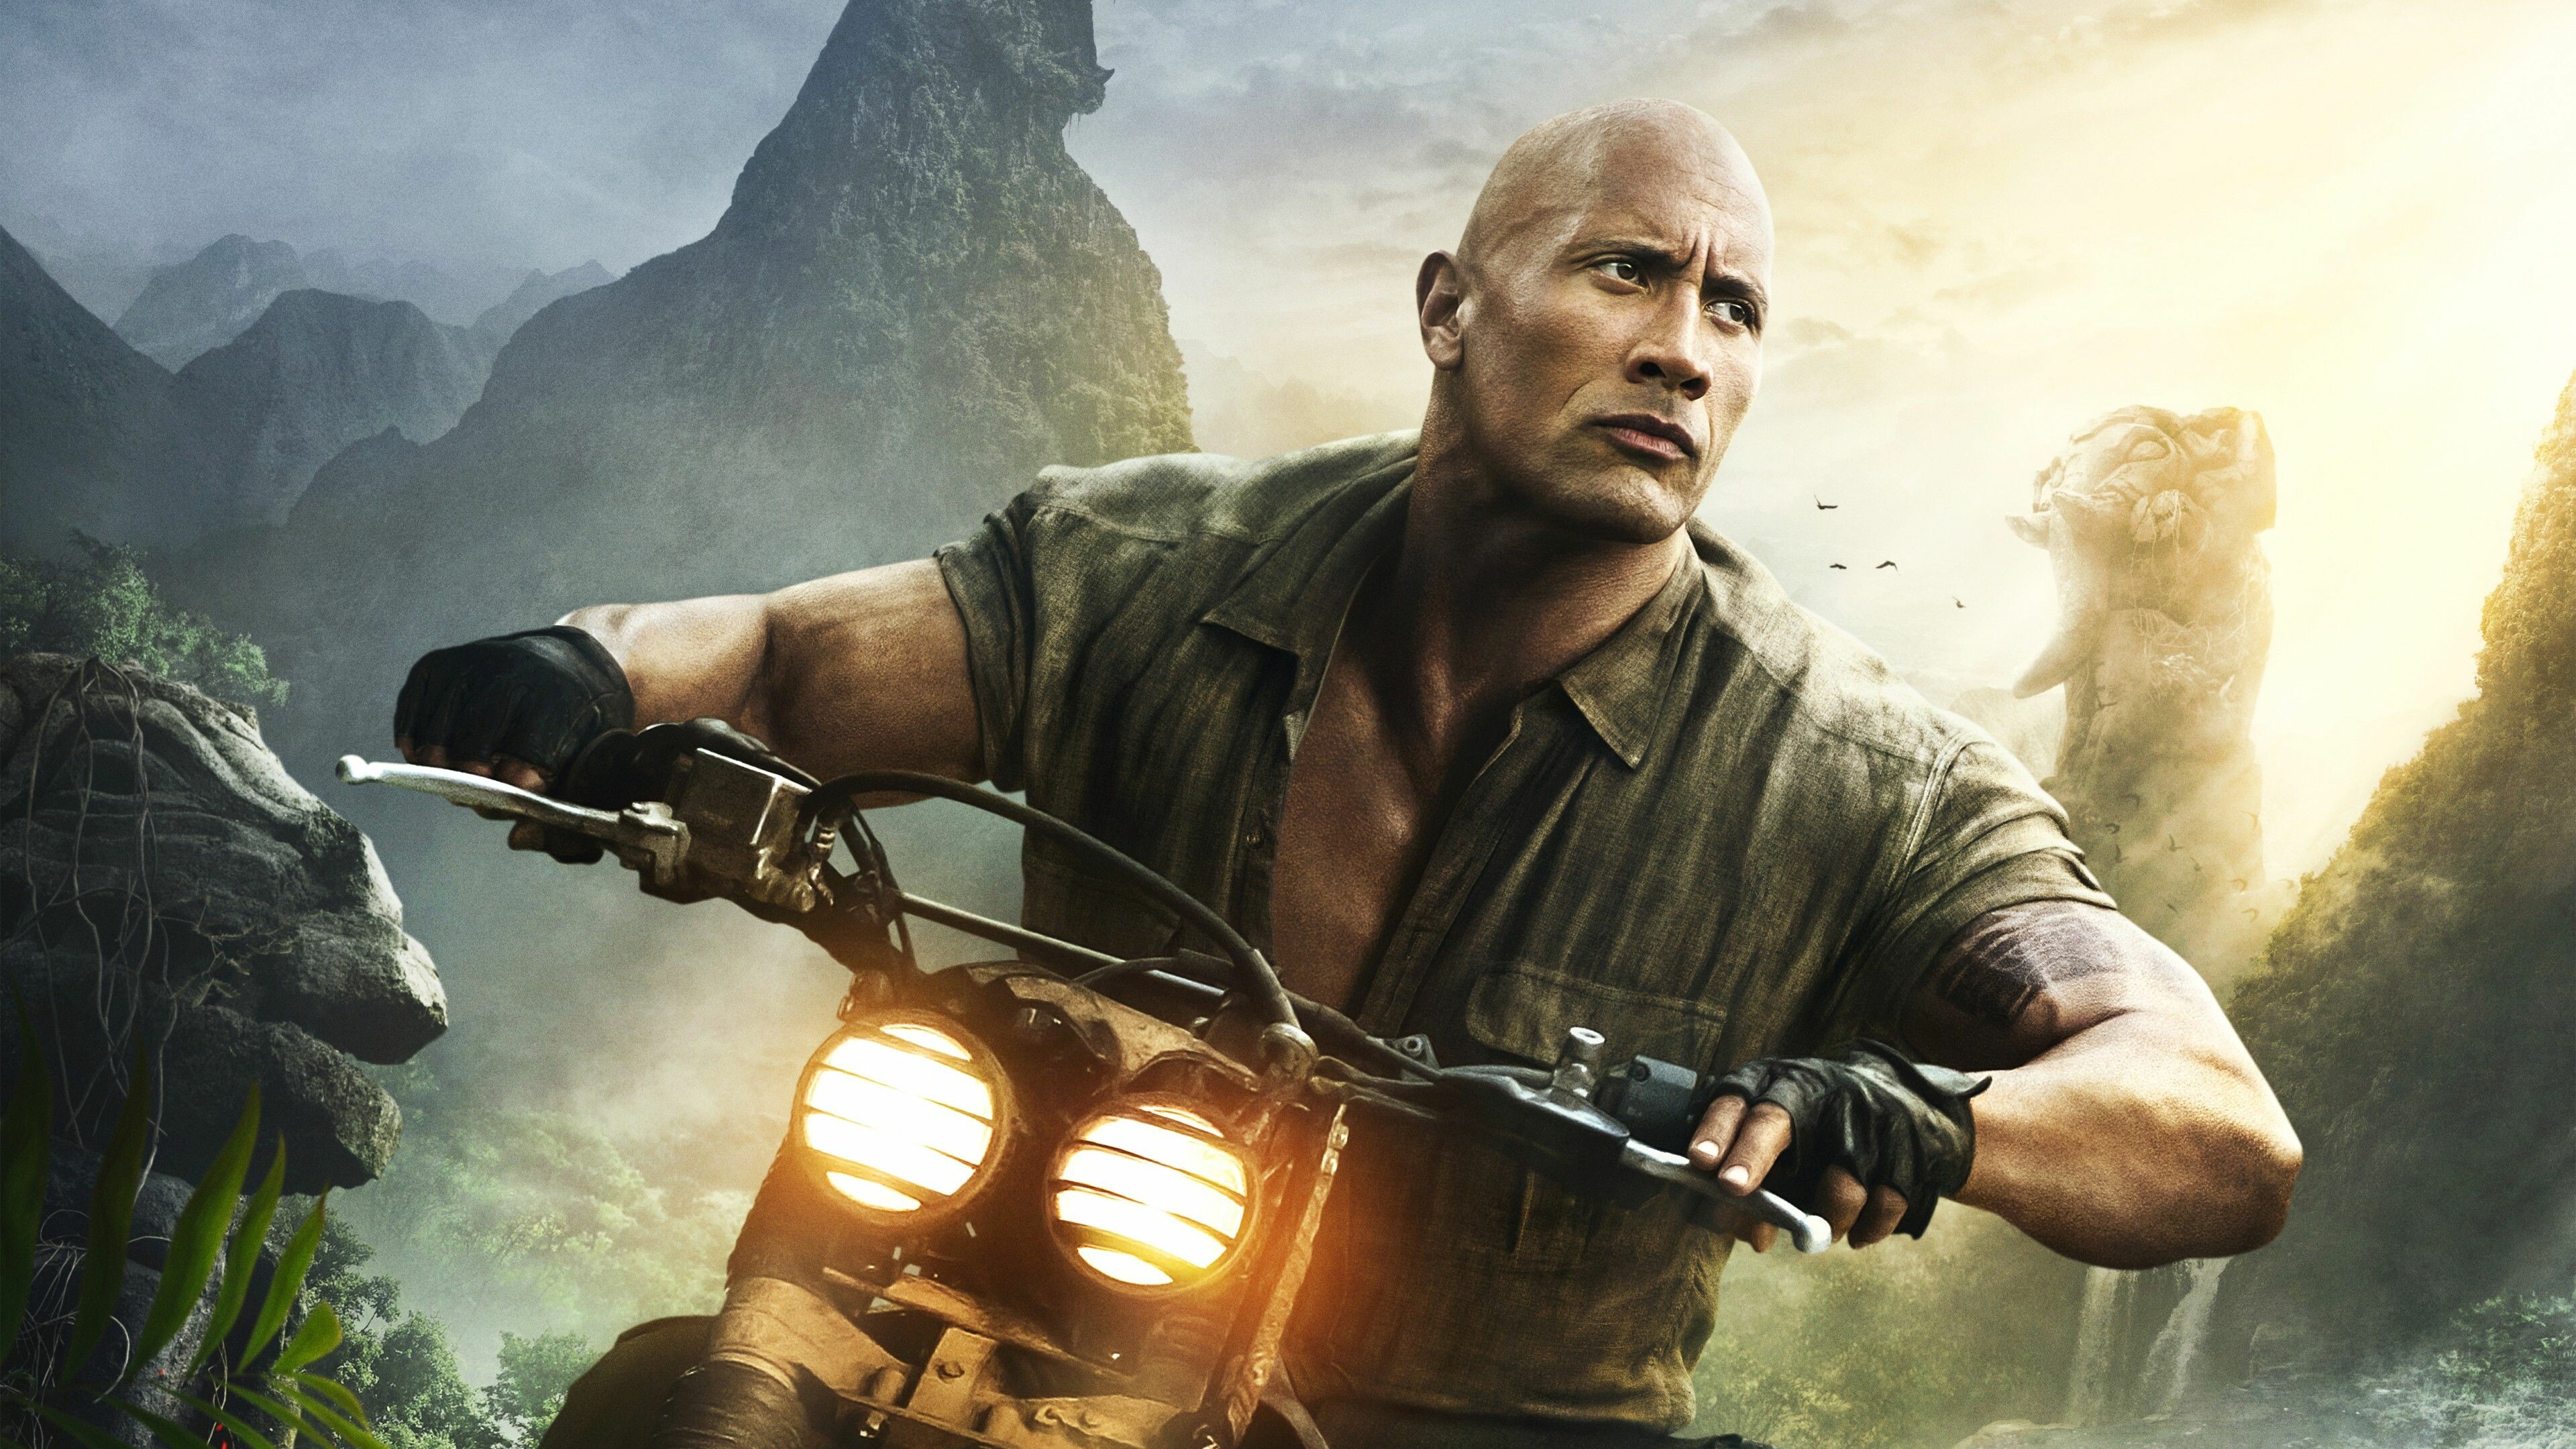 Dwayne Johnson: Jumanji, The Rock, one of the greatest professional wrestlers of all time. 3840x2160 4K Background.